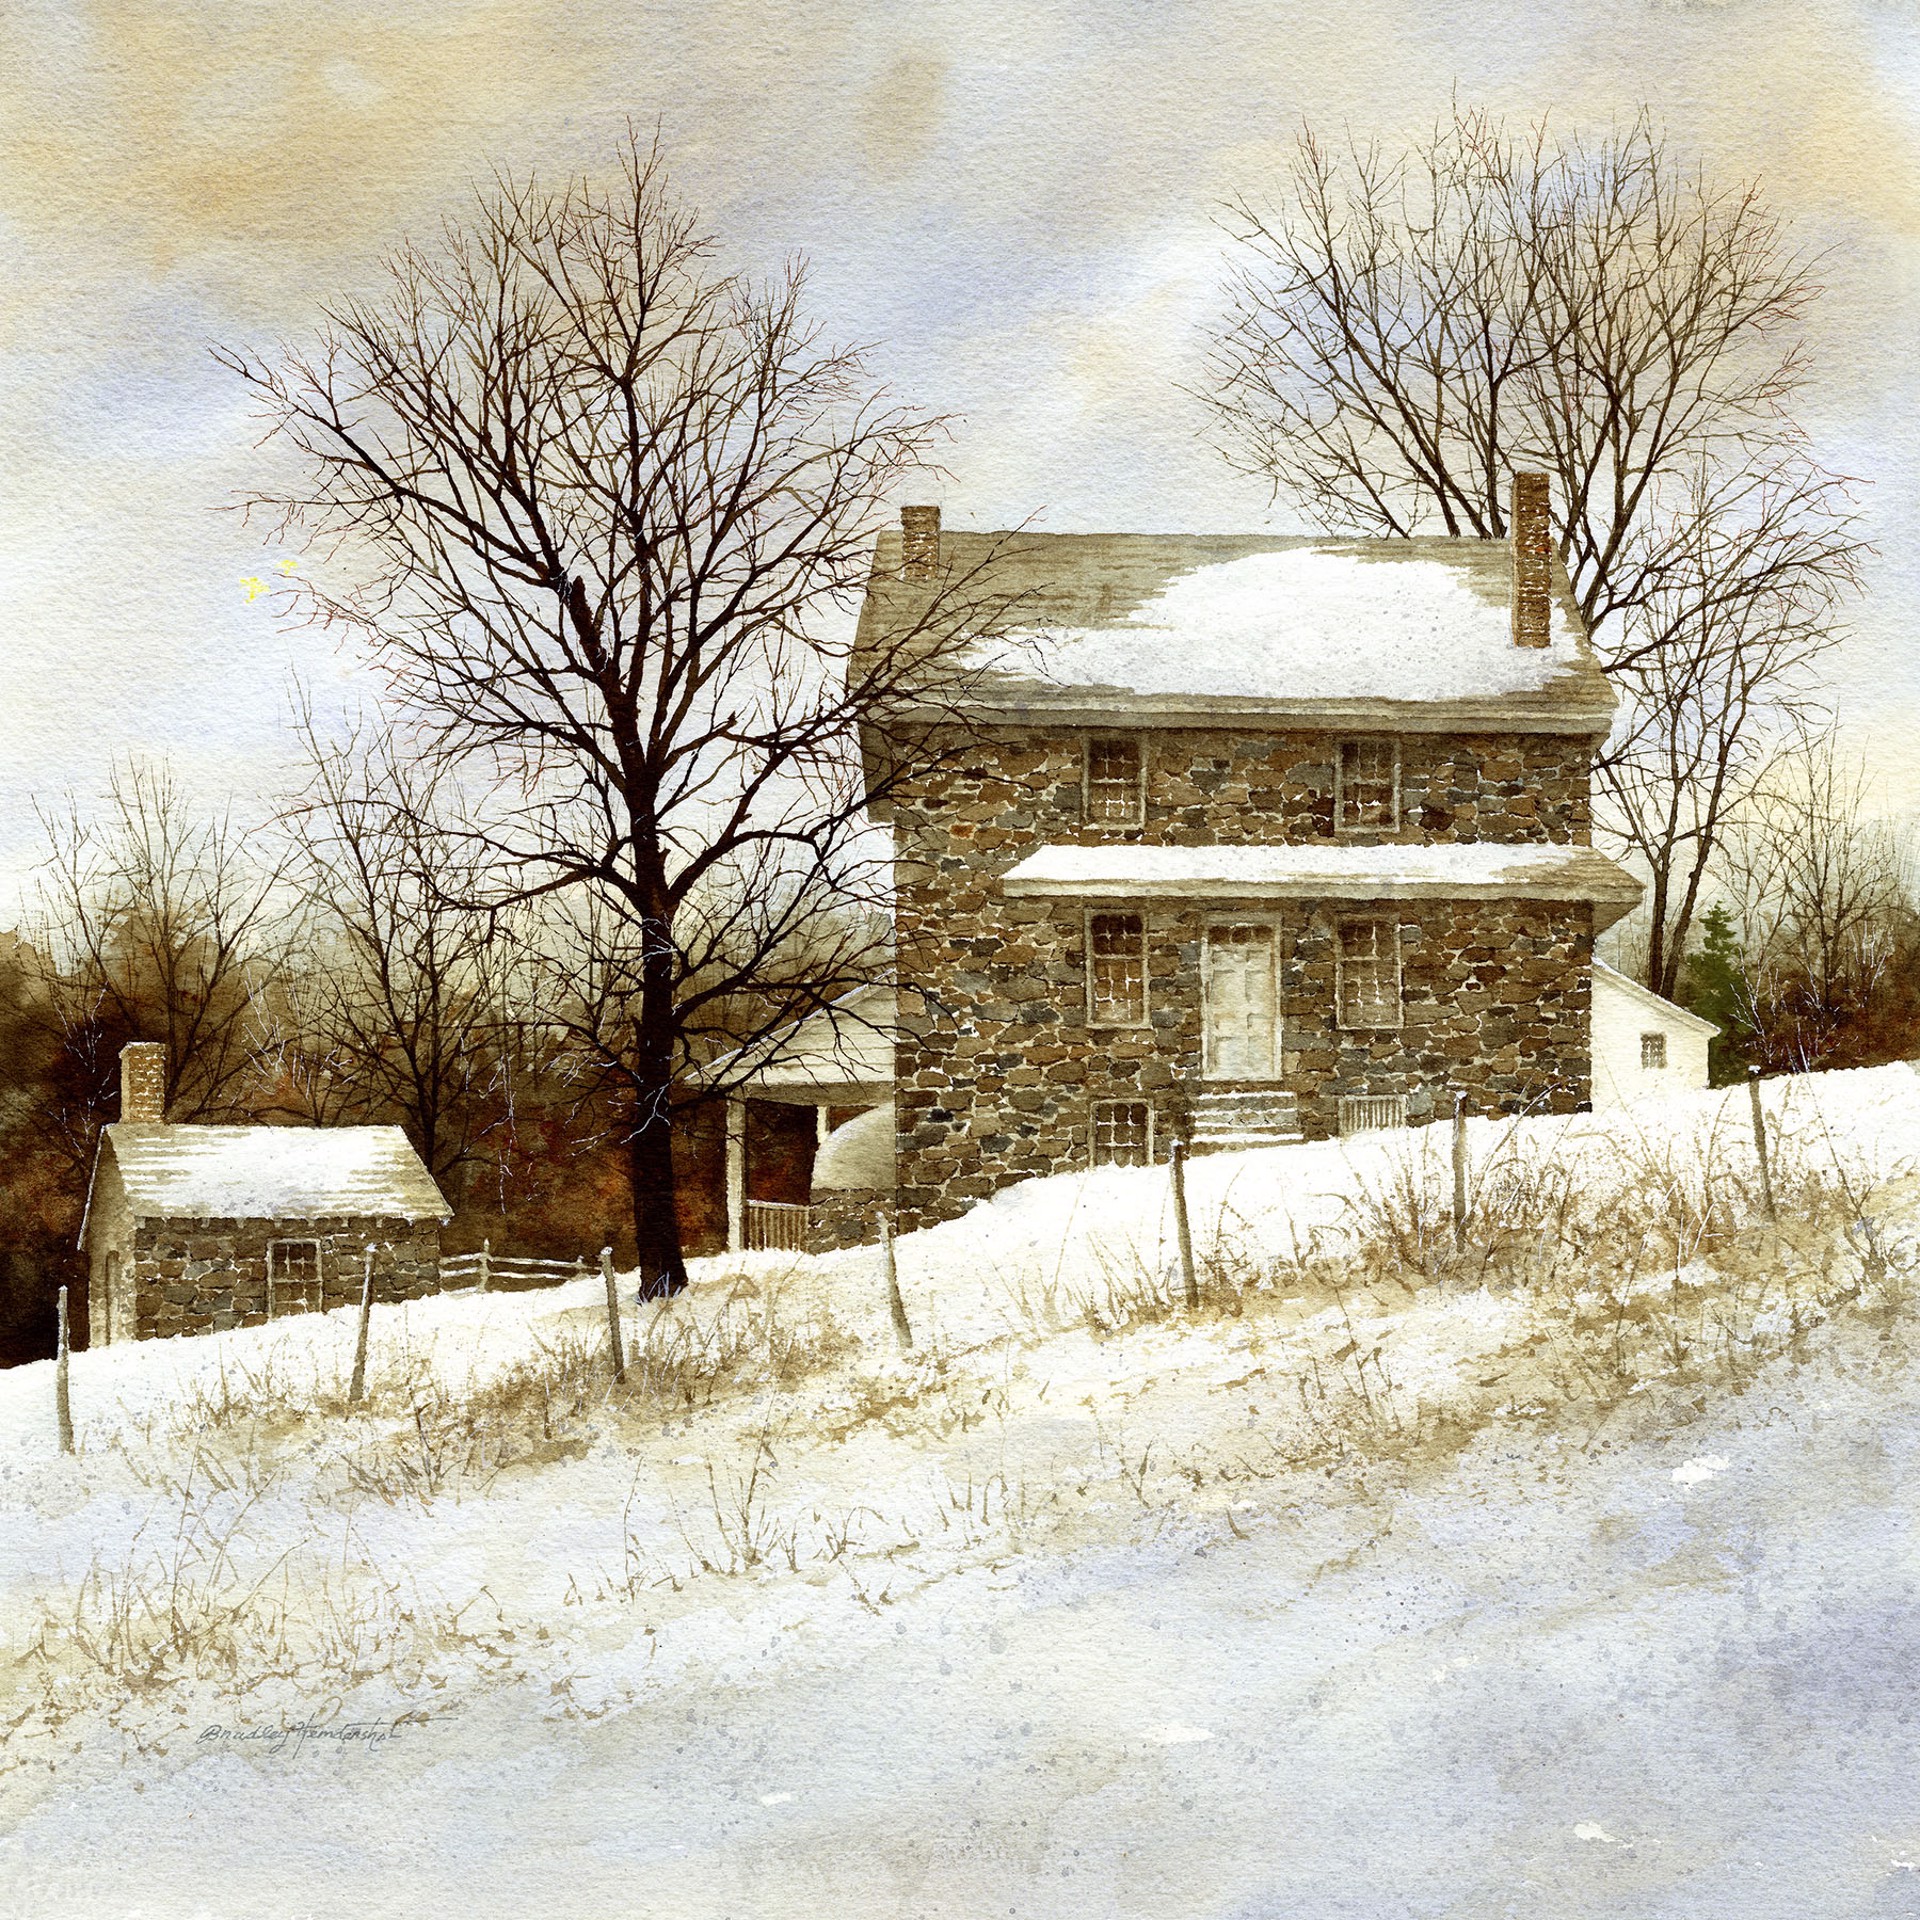 Winter At The Chad House by Bradley Hendershot